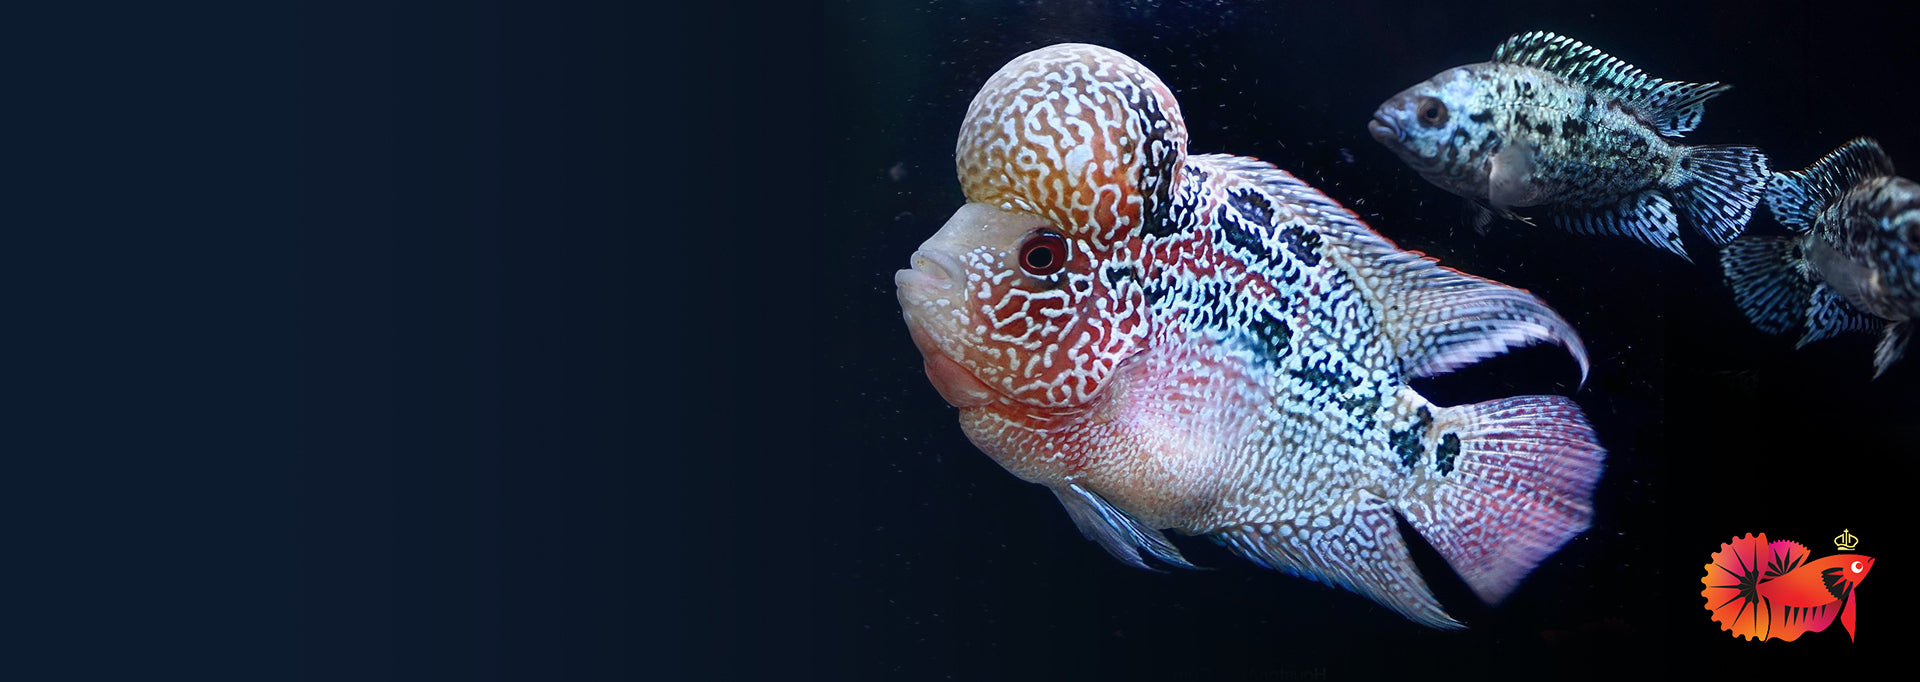 Flowerhorn Cichlid Fish In Fish Tank Stock Photo Picture And Royalty Free  Image Image 65375155